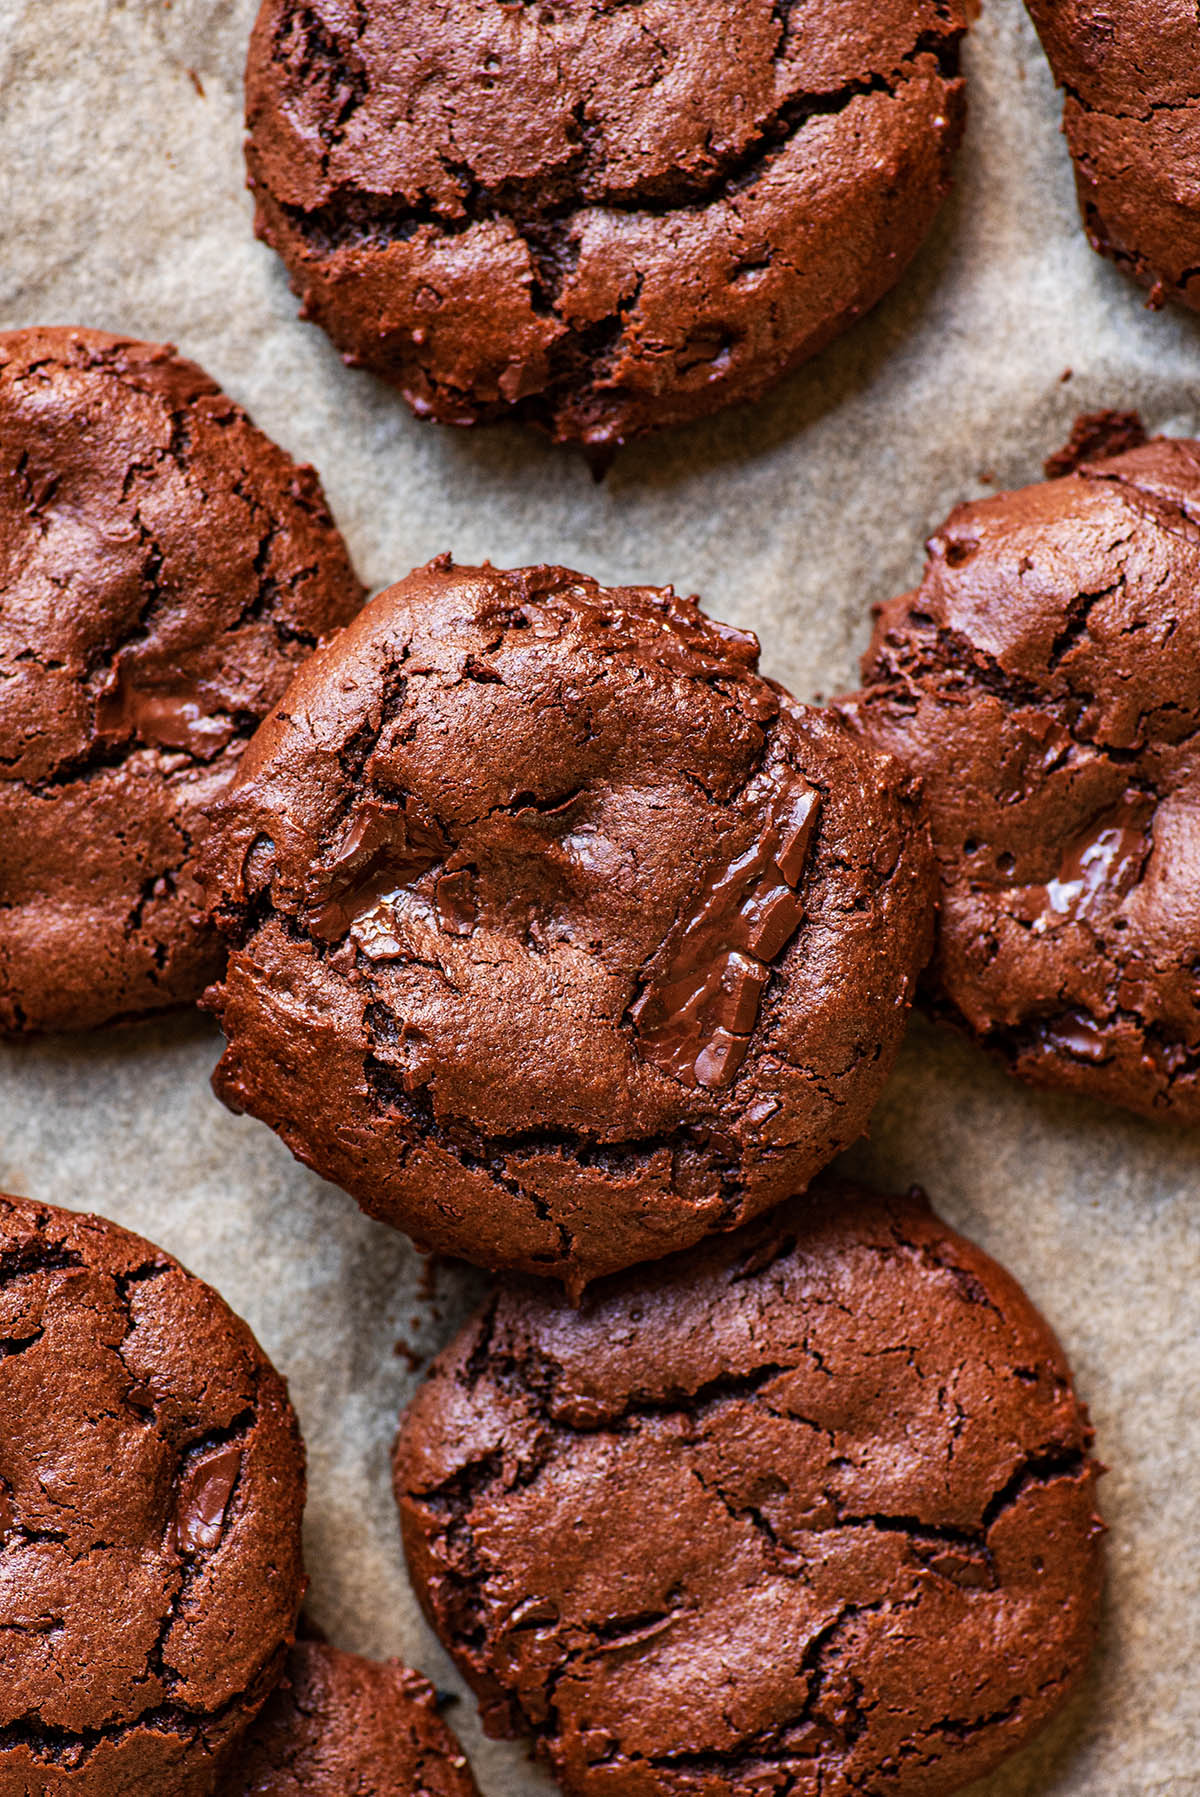 Chocolate cookies piled on a baking sheet.